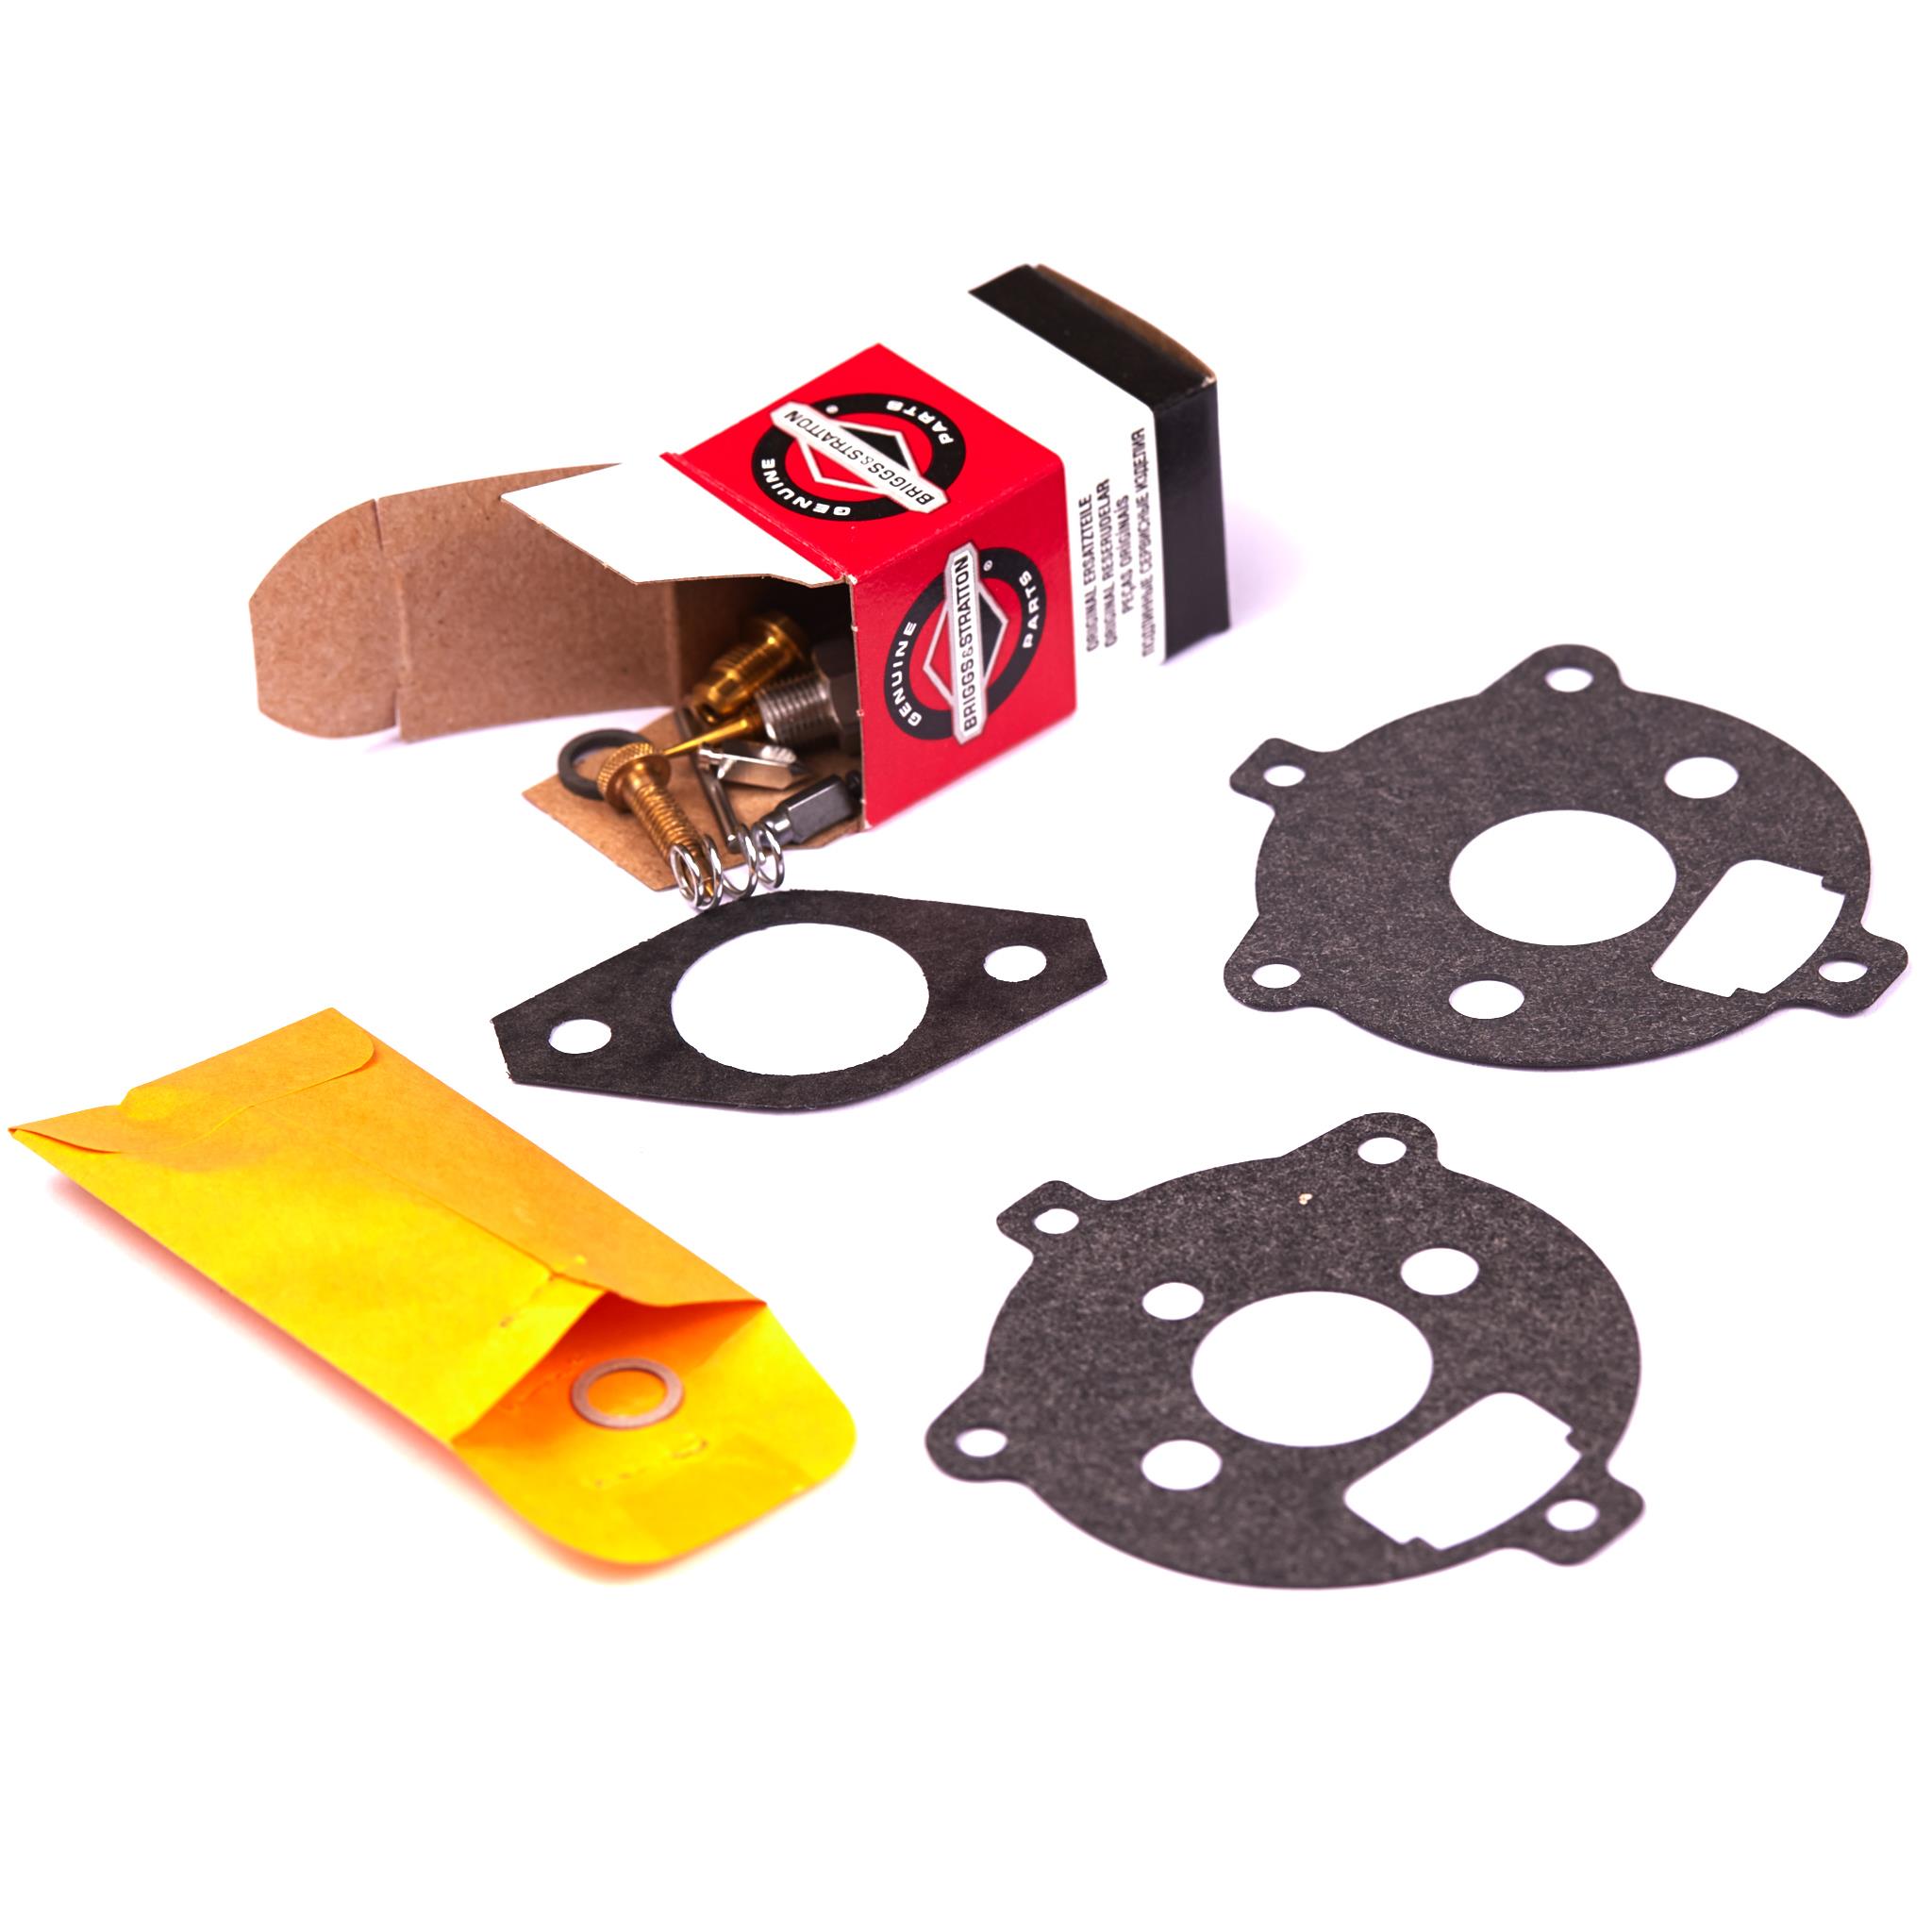 KIT-CARB OVERHAUL part# 394693 by Briggs & Stratton - Click Image to Close